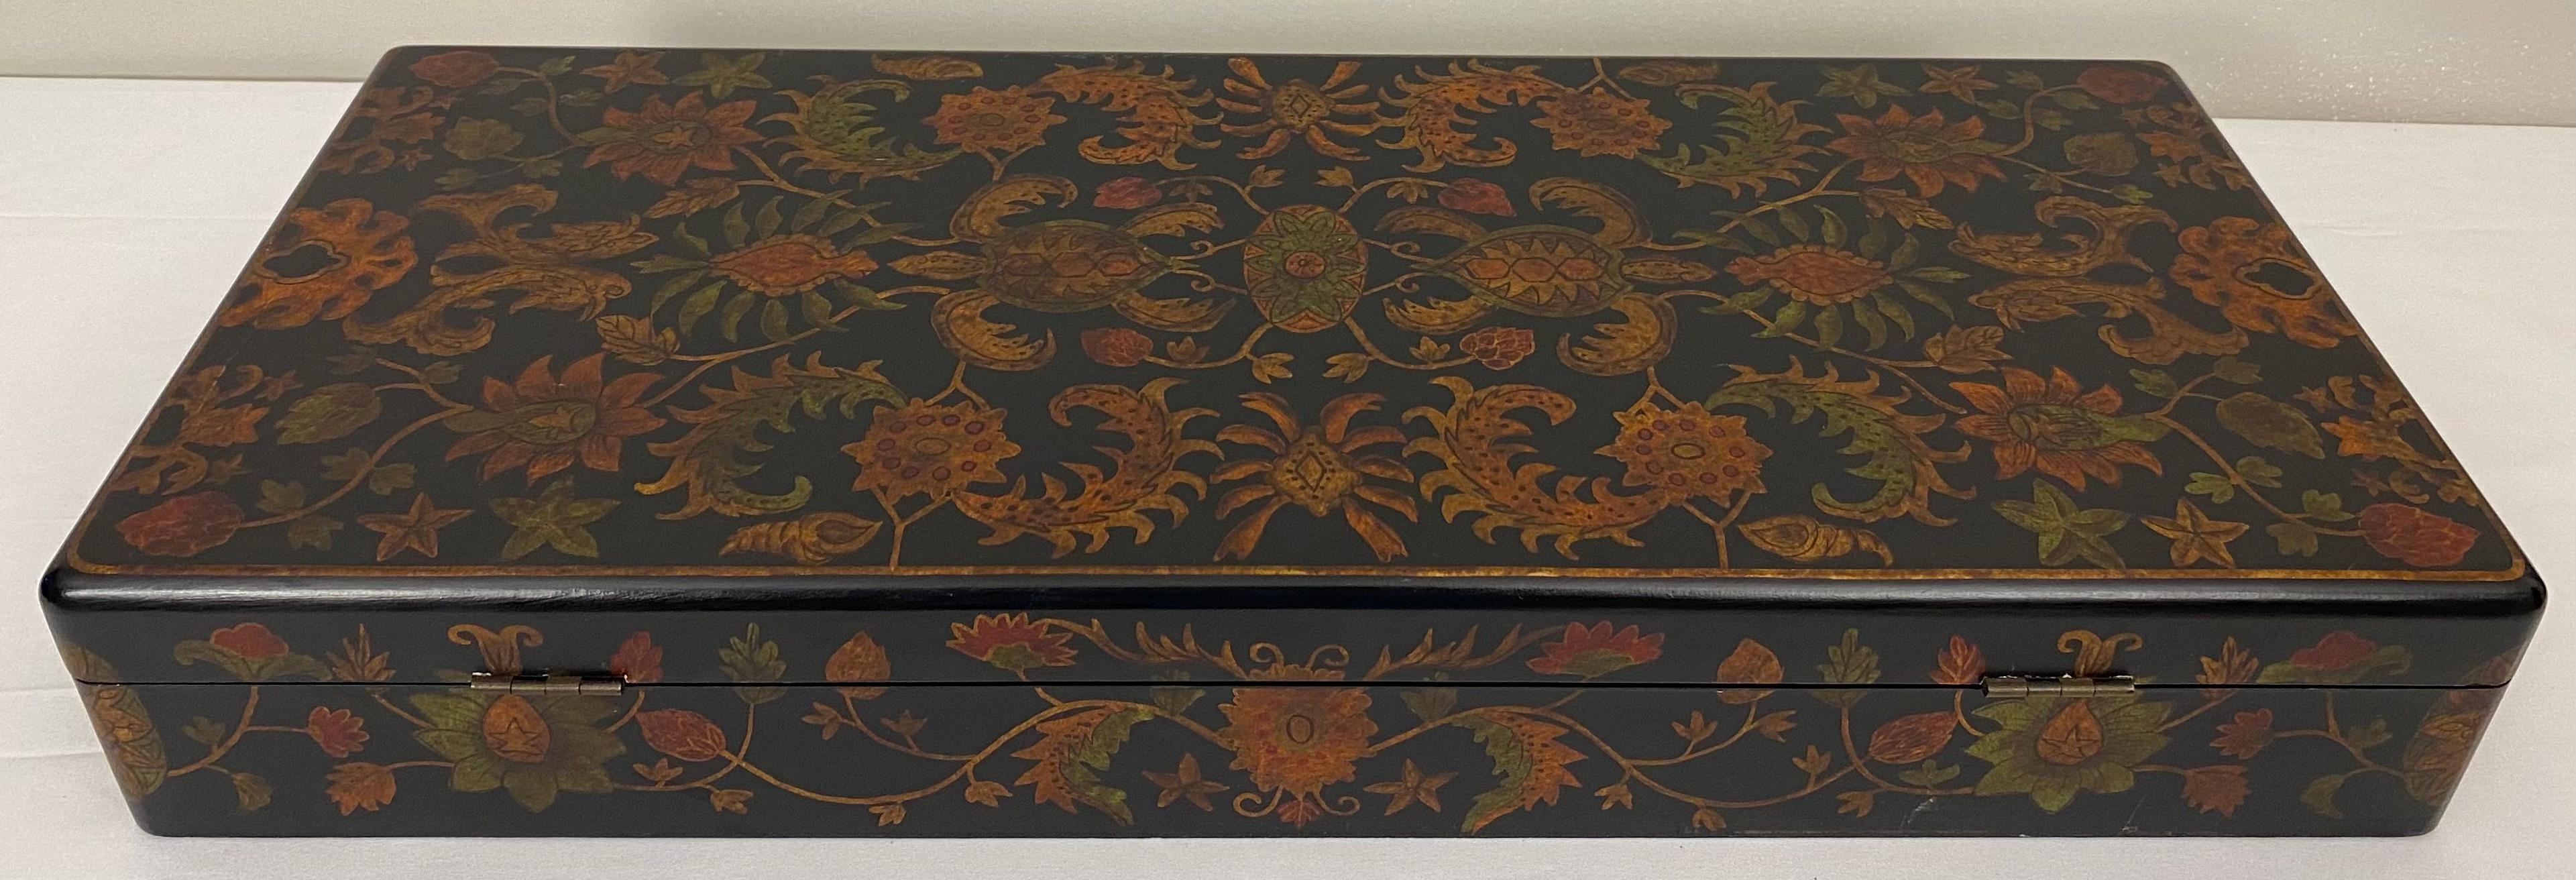 Large Hand Painted Wooden Jewelry Box For Sale 2